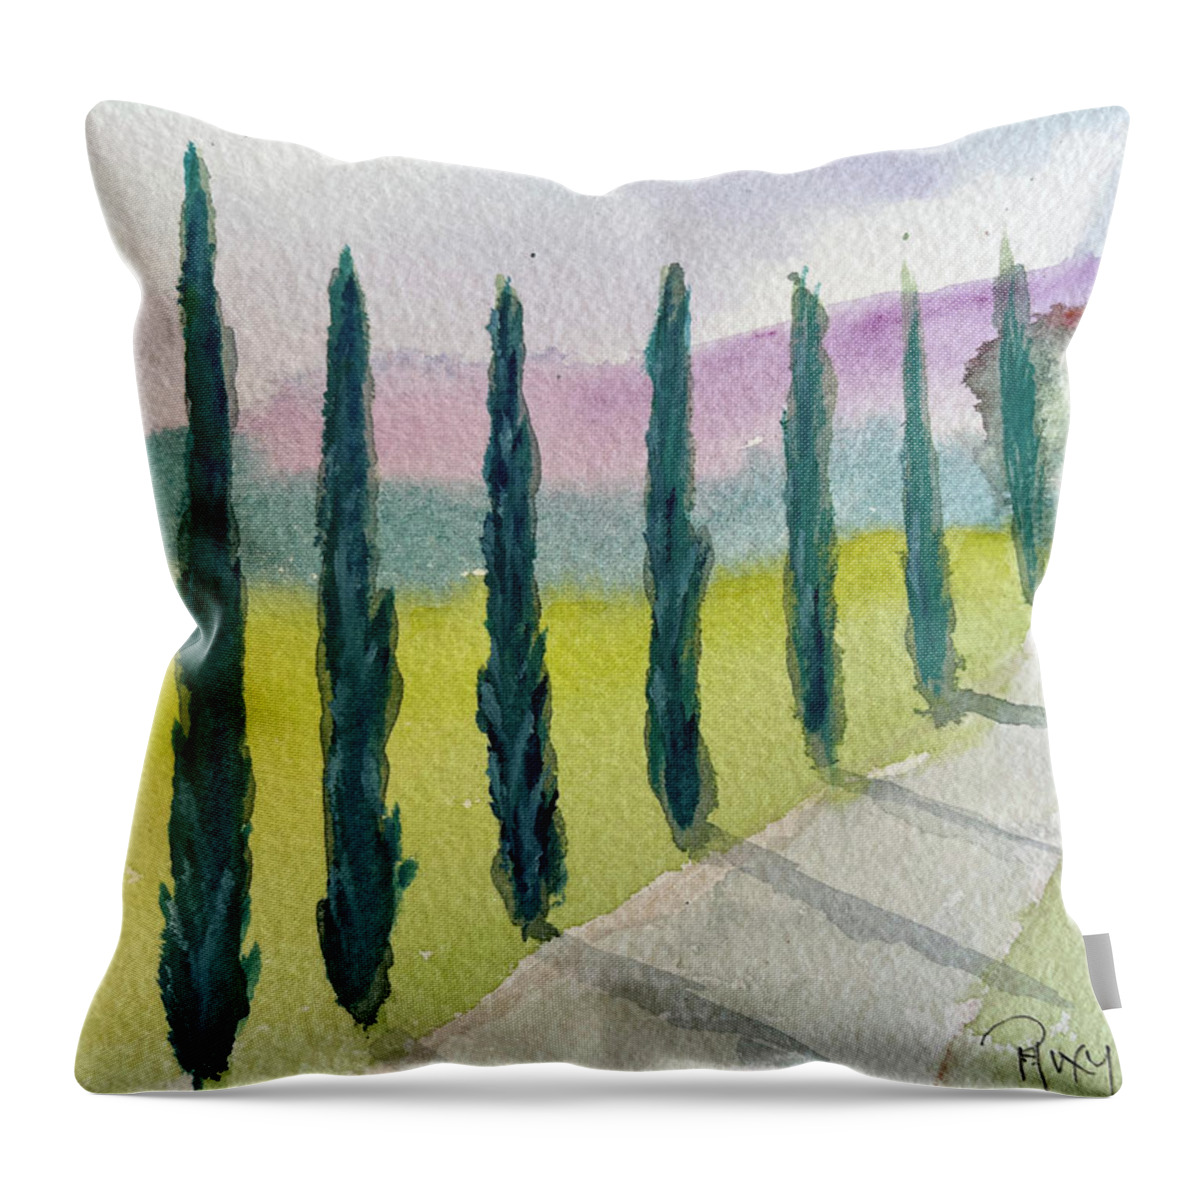 Cypress Trees Throw Pillow featuring the painting Cypress Trees Landscape by Roxy Rich